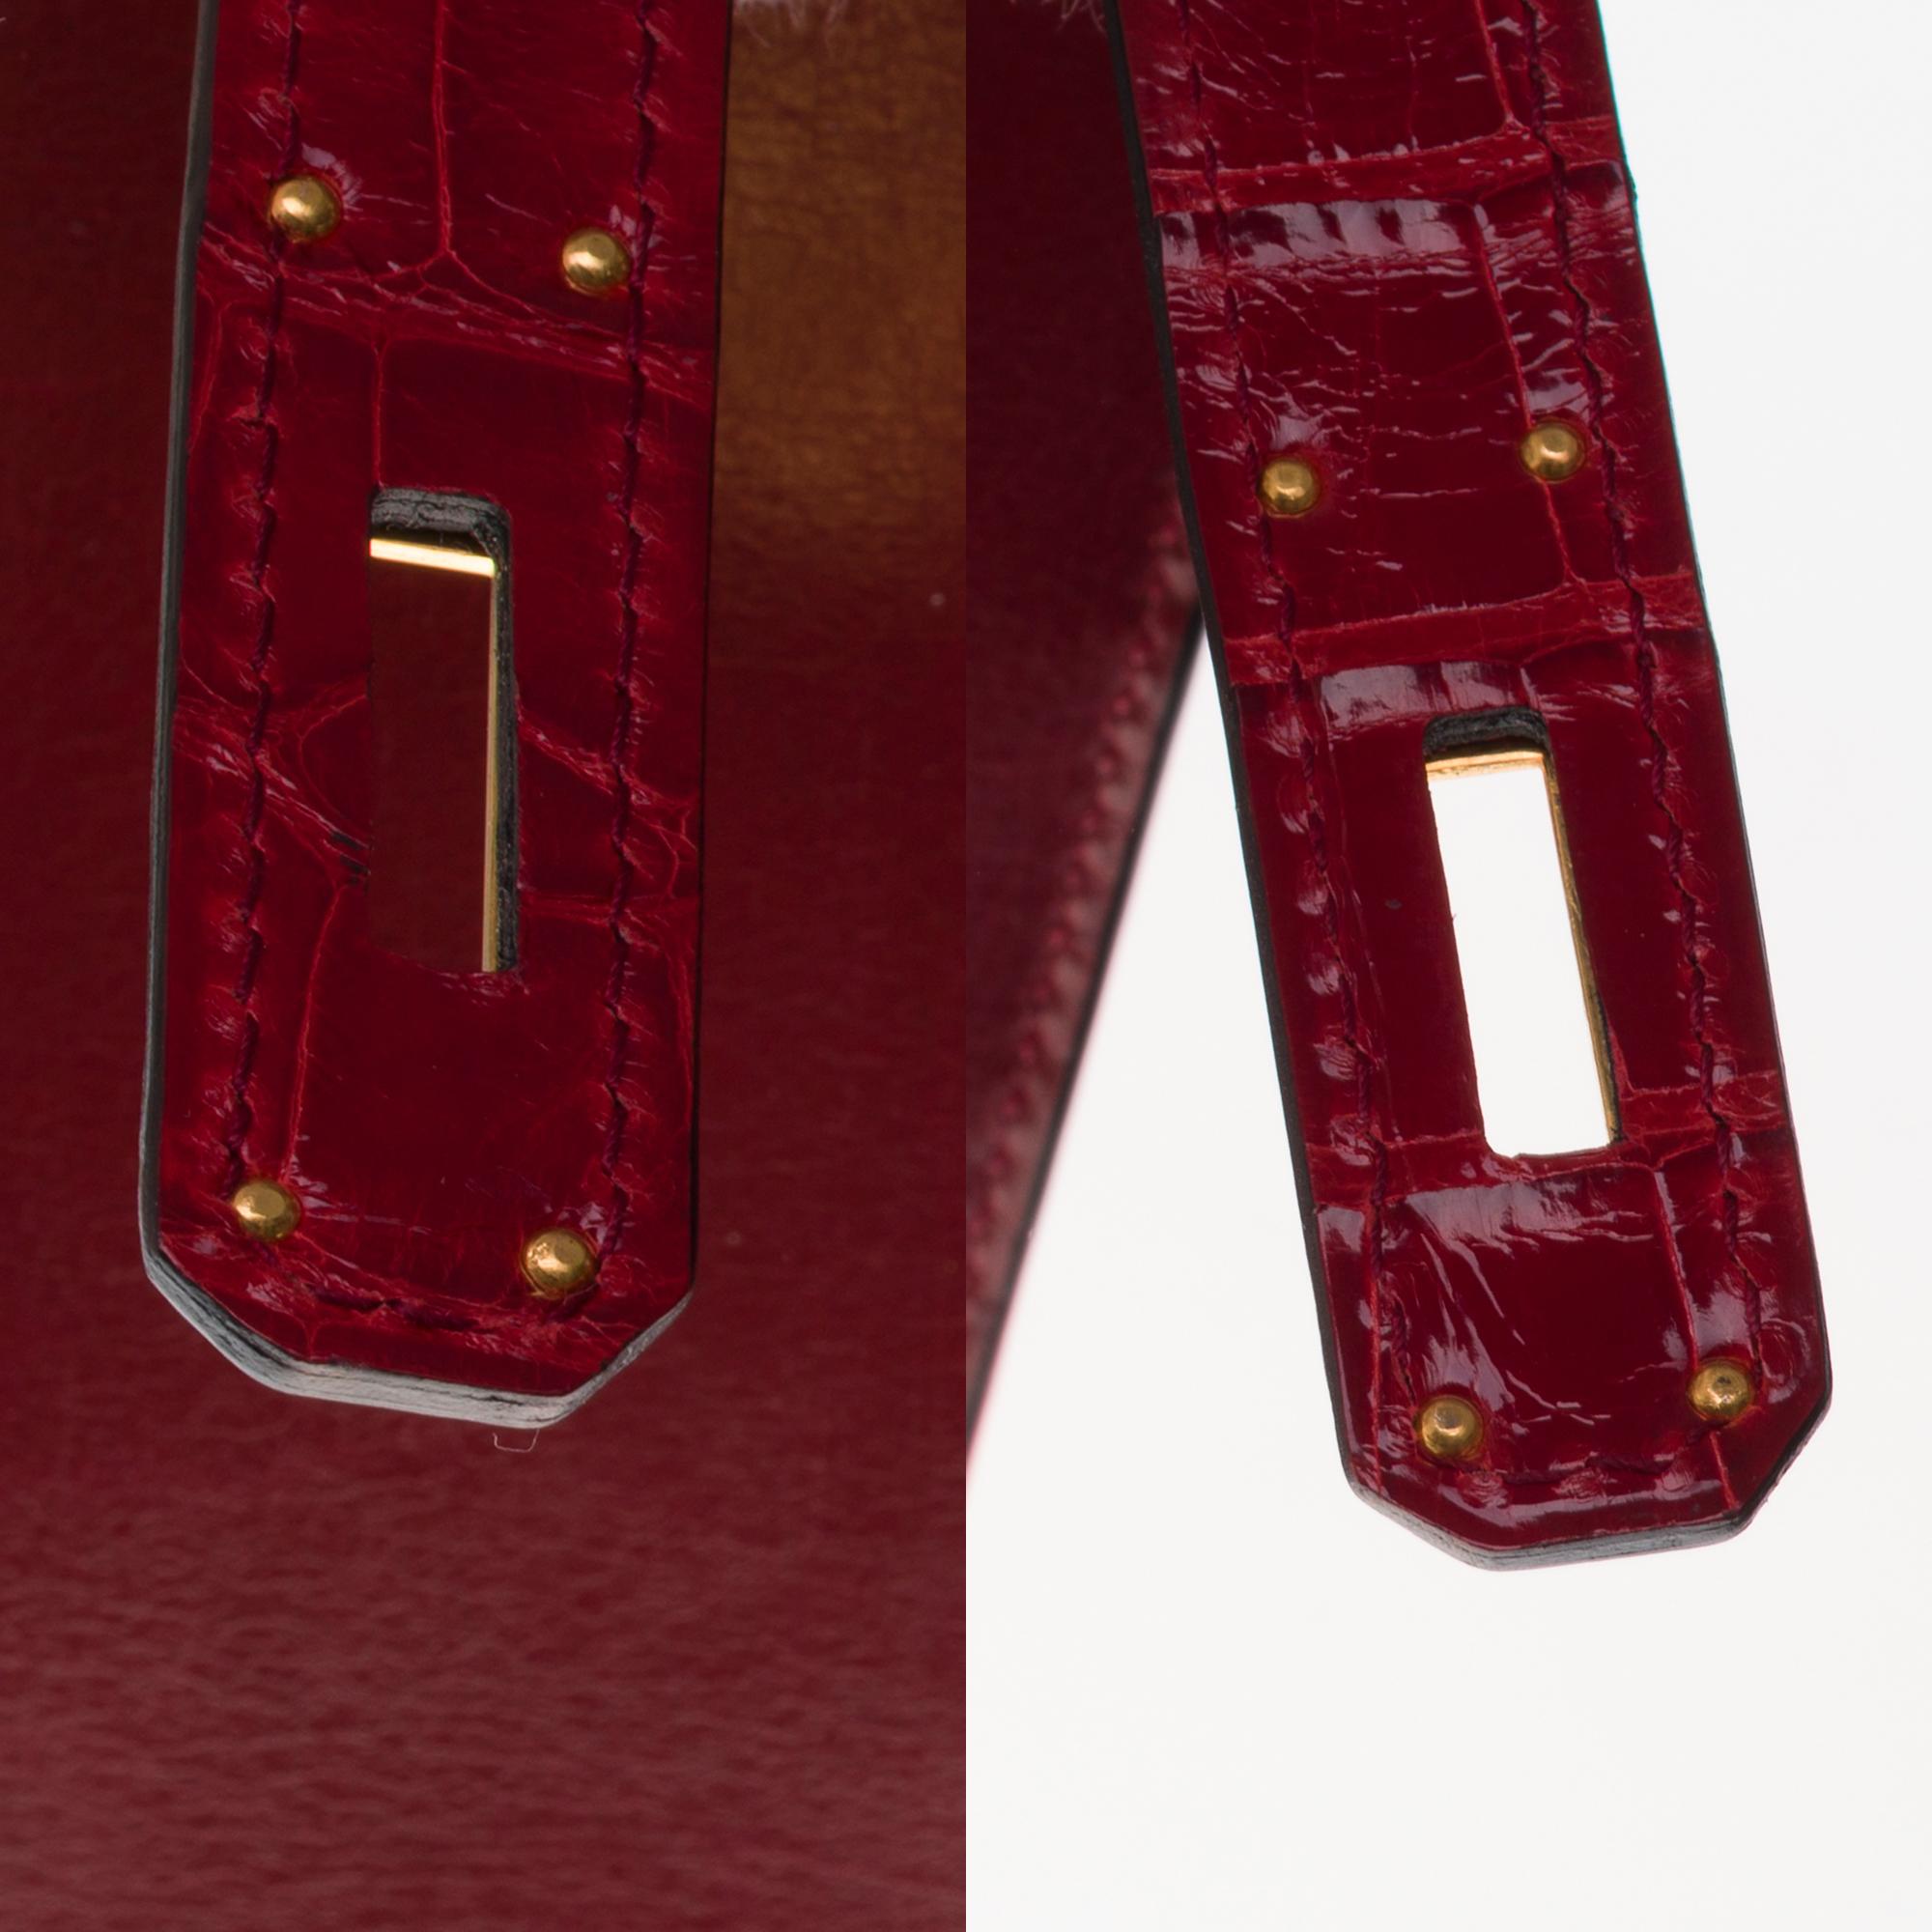 Customized Hermès Kelly 32 in Rouge H calfskin strap with Red Crocodile, GHW  3